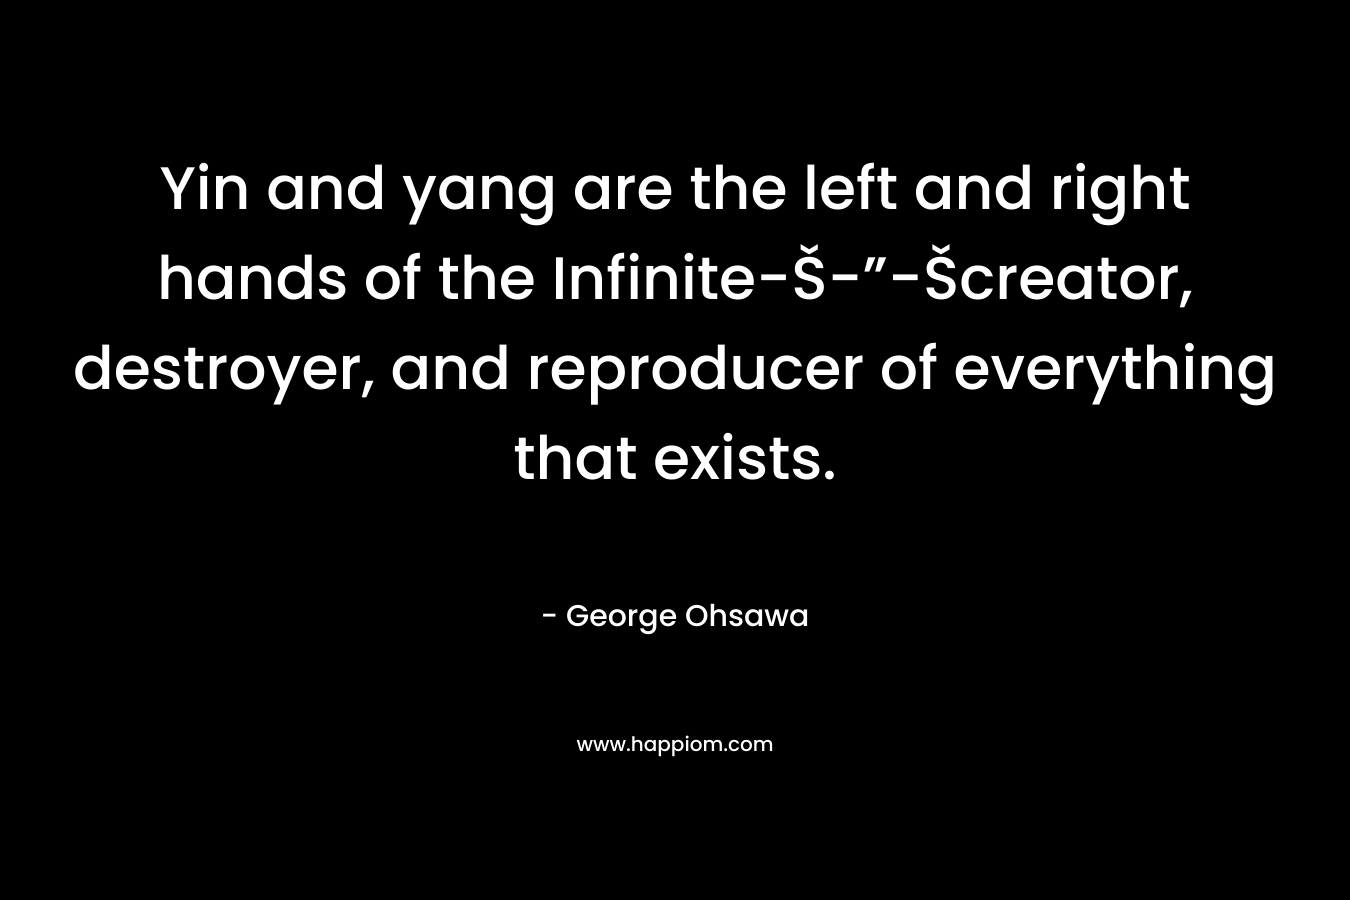 Yin and yang are the left and right hands of the Infinite-Š-”-Šcreator, destroyer, and reproducer of everything that exists. – George Ohsawa